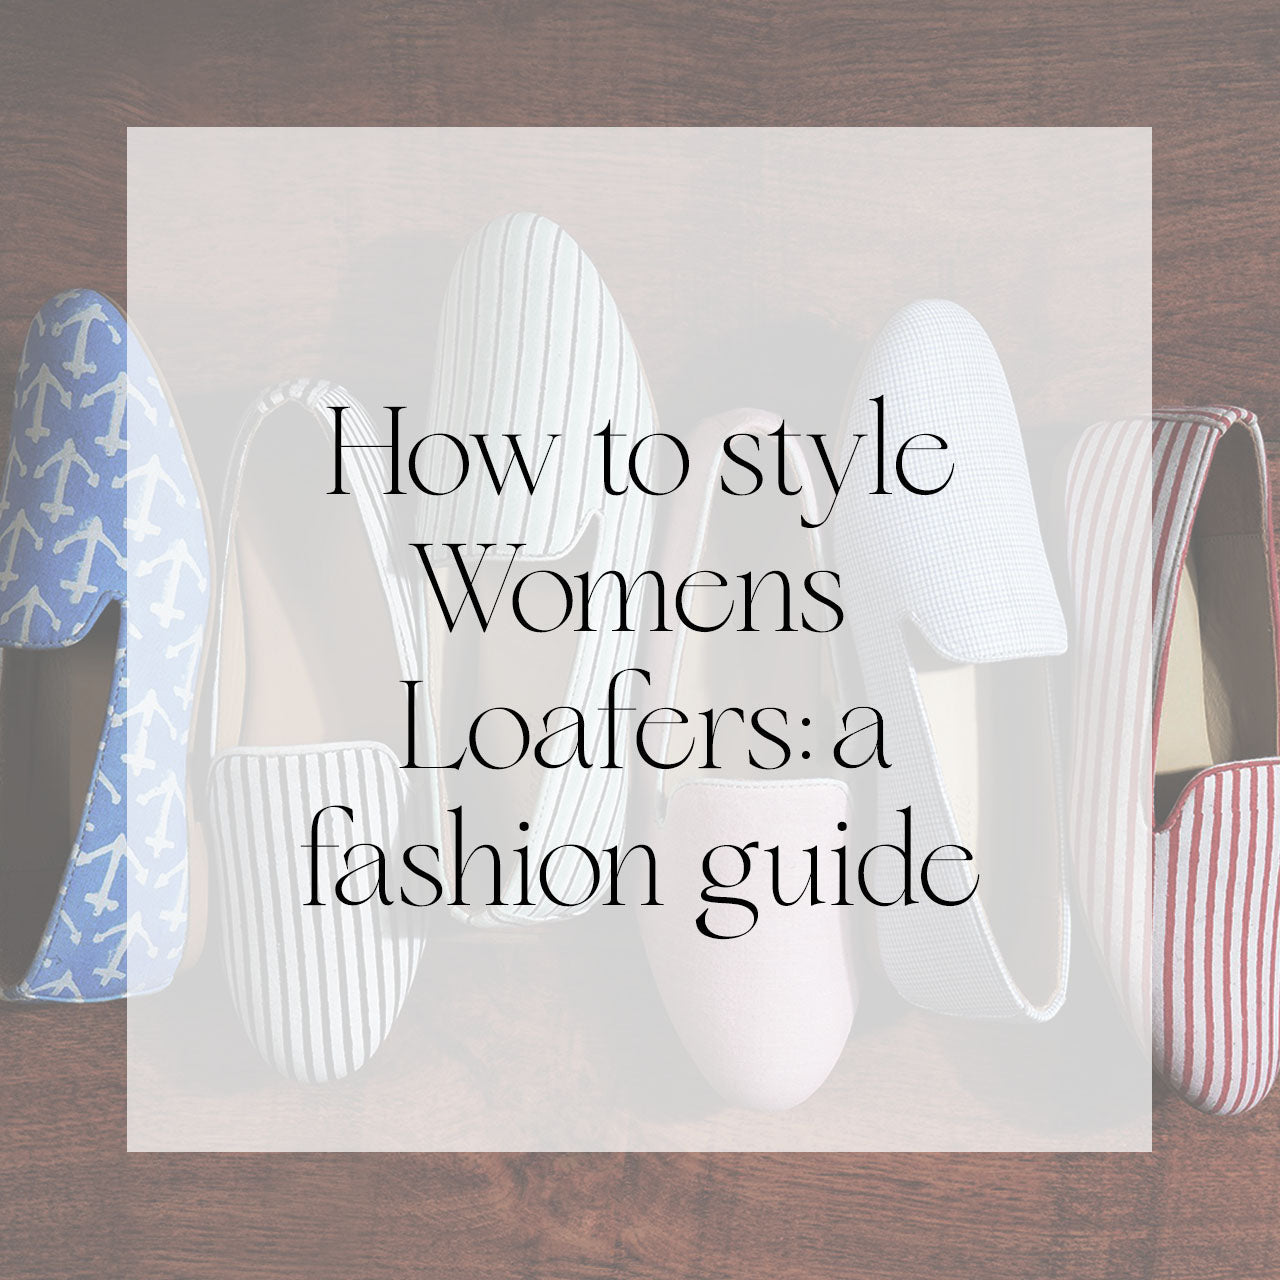 How to Style Women's Loafers: A Fashion Guide